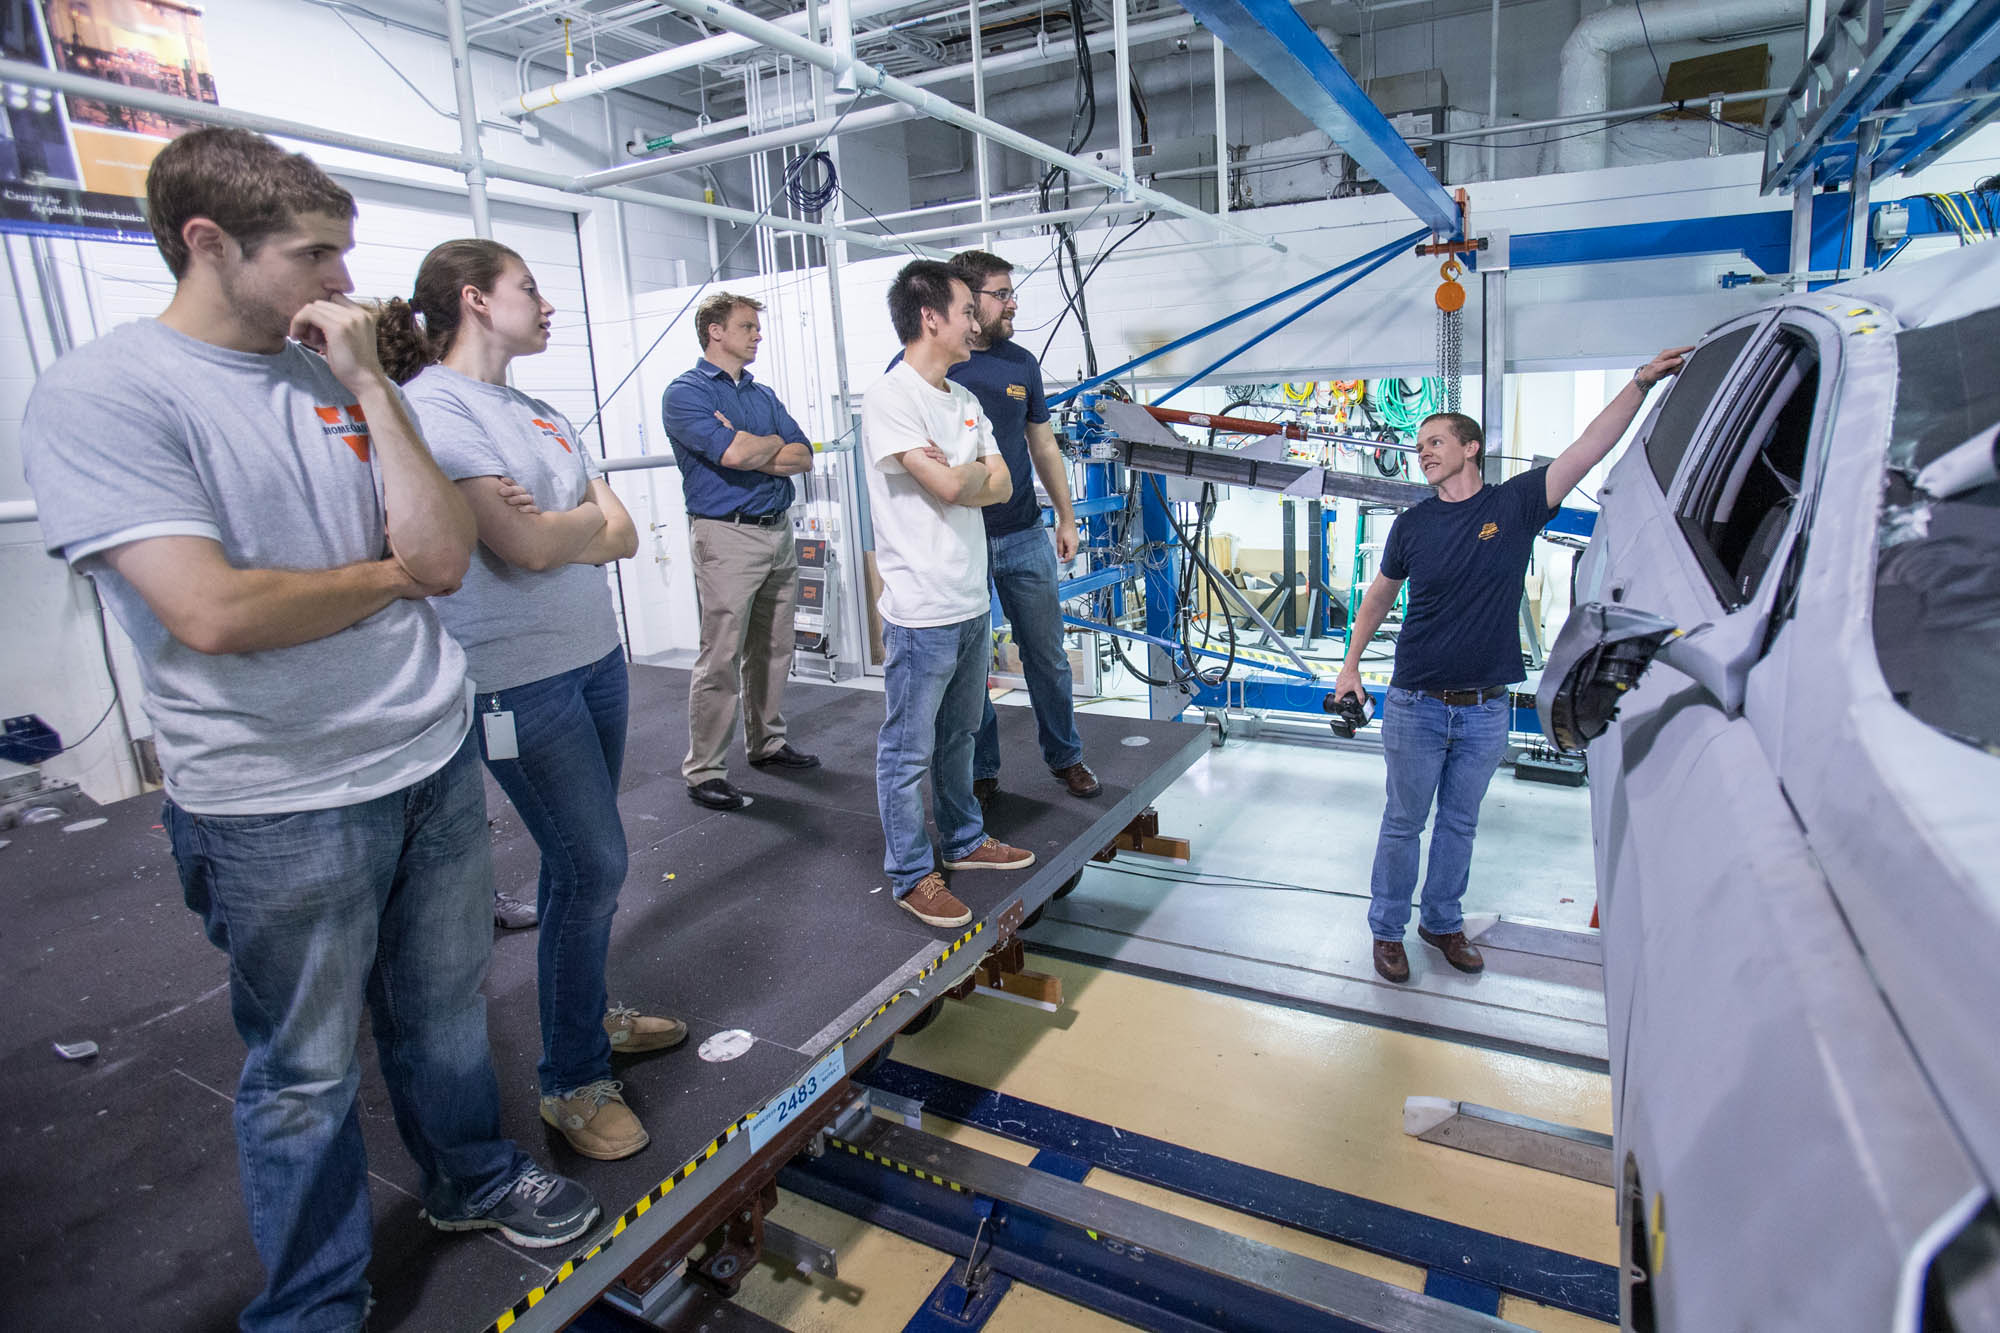 Mechanical engineering professor Jason Kerrigan discusses a crash test result with students.